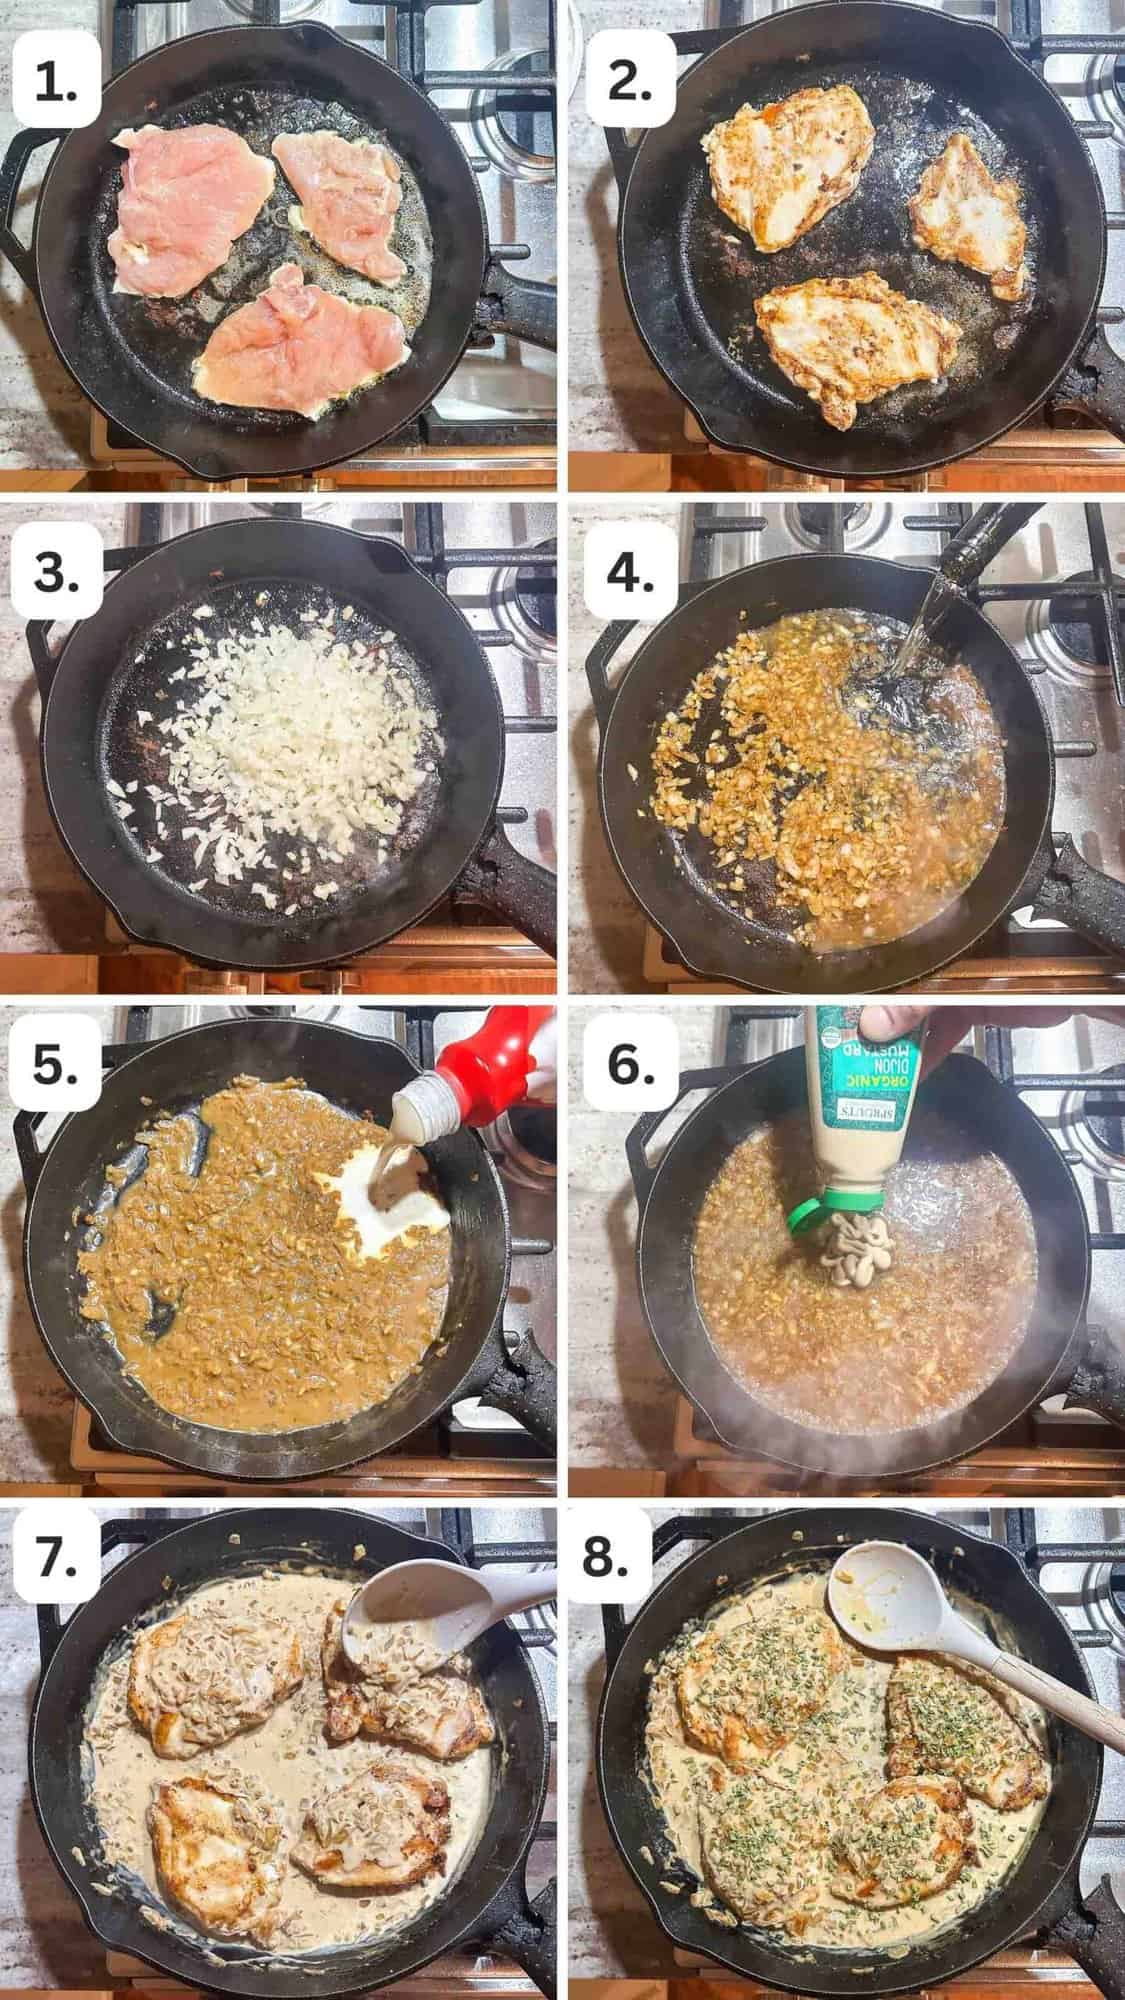 step by step photos showing how to make this recipe